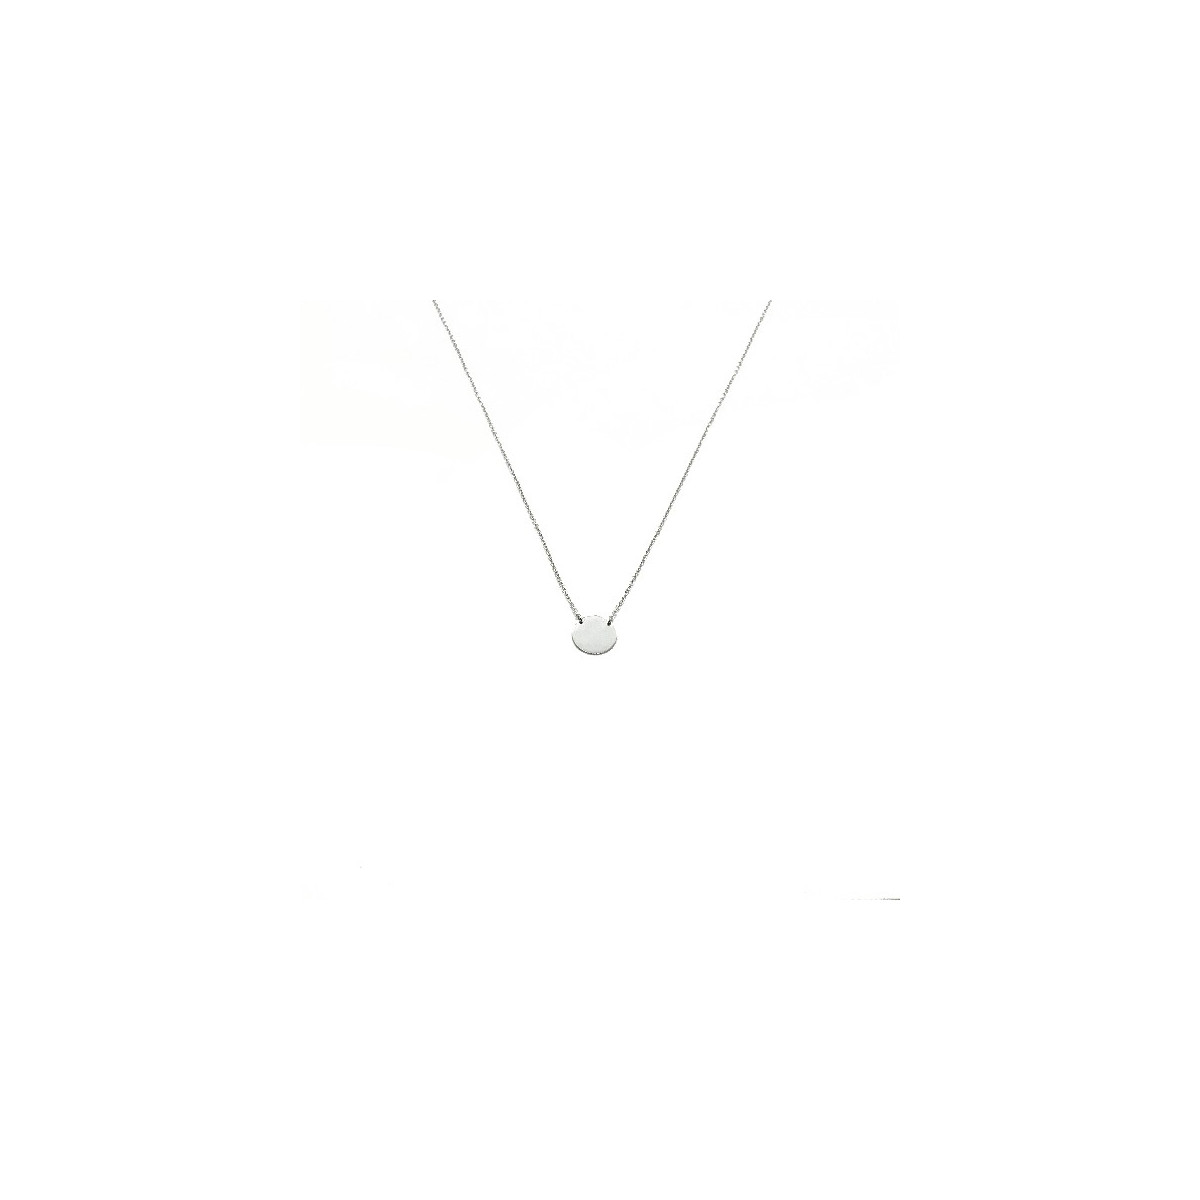 WHITE GOLD EKAN NECKLACE - 082255